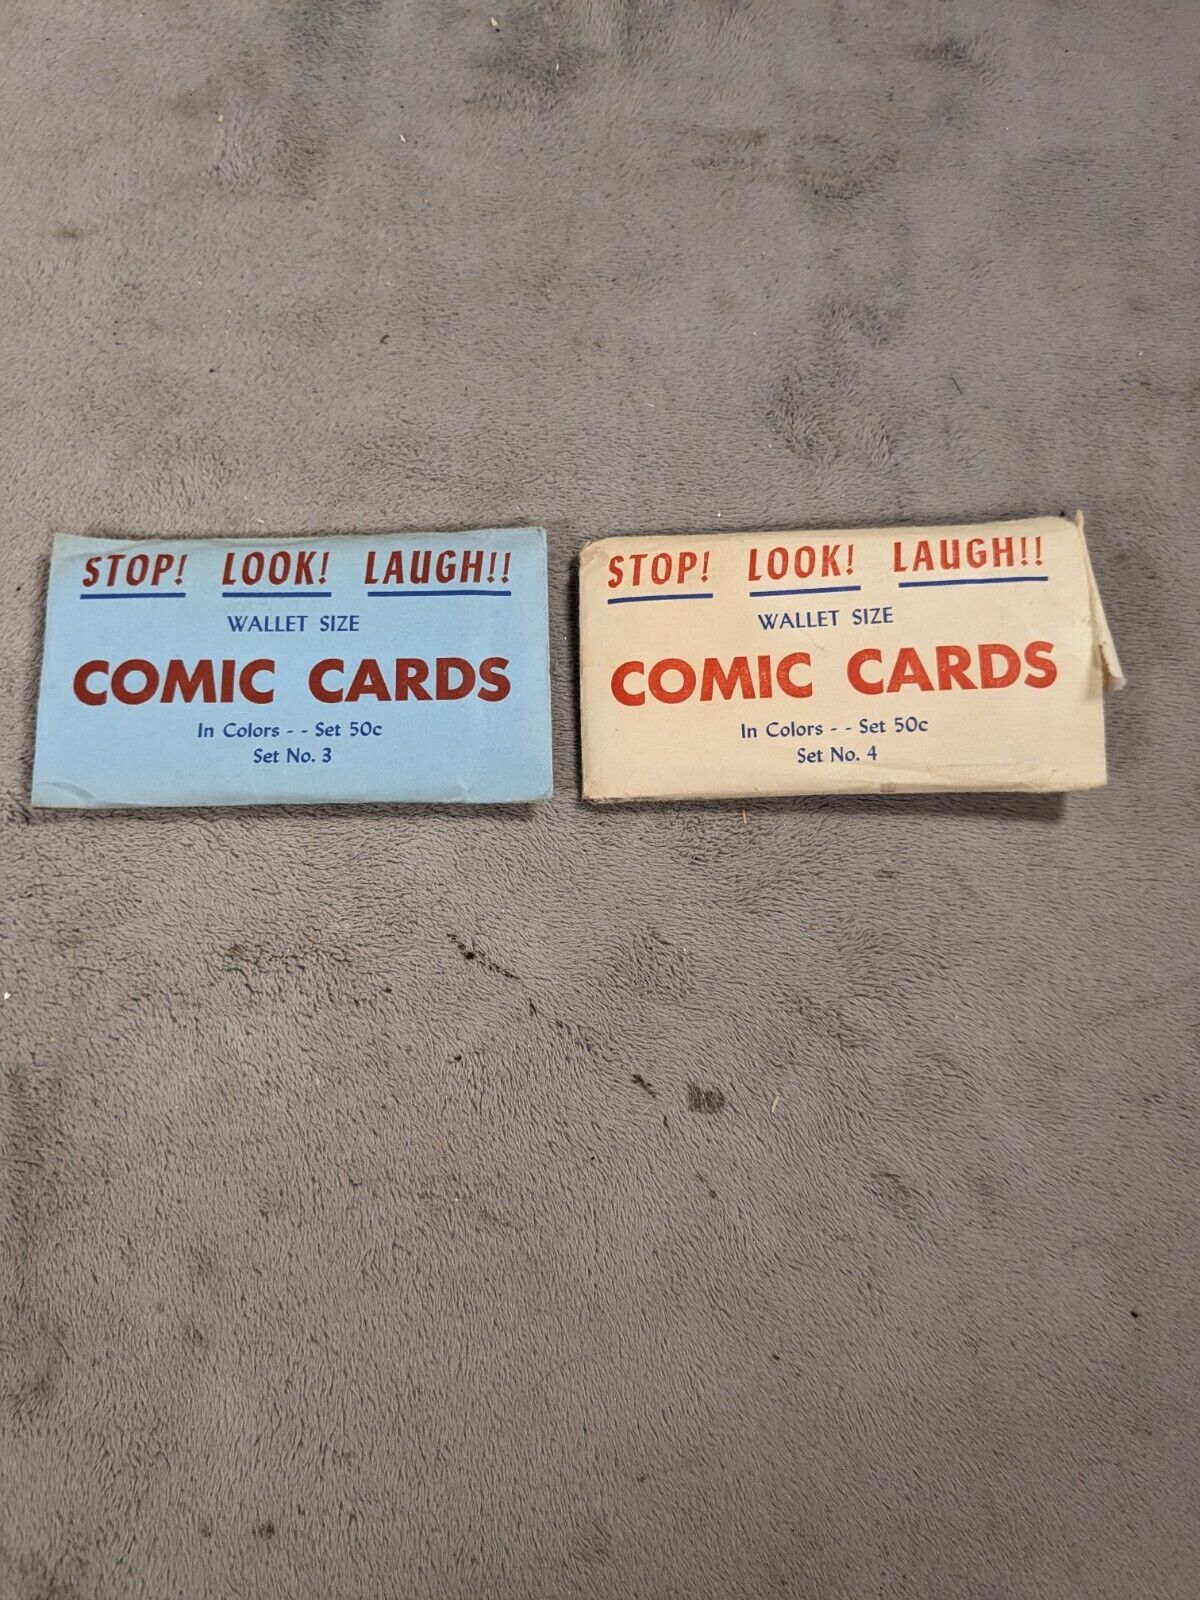 12 Wallet Sized Comic Cards In Colors From Set No.3 & Set No.4